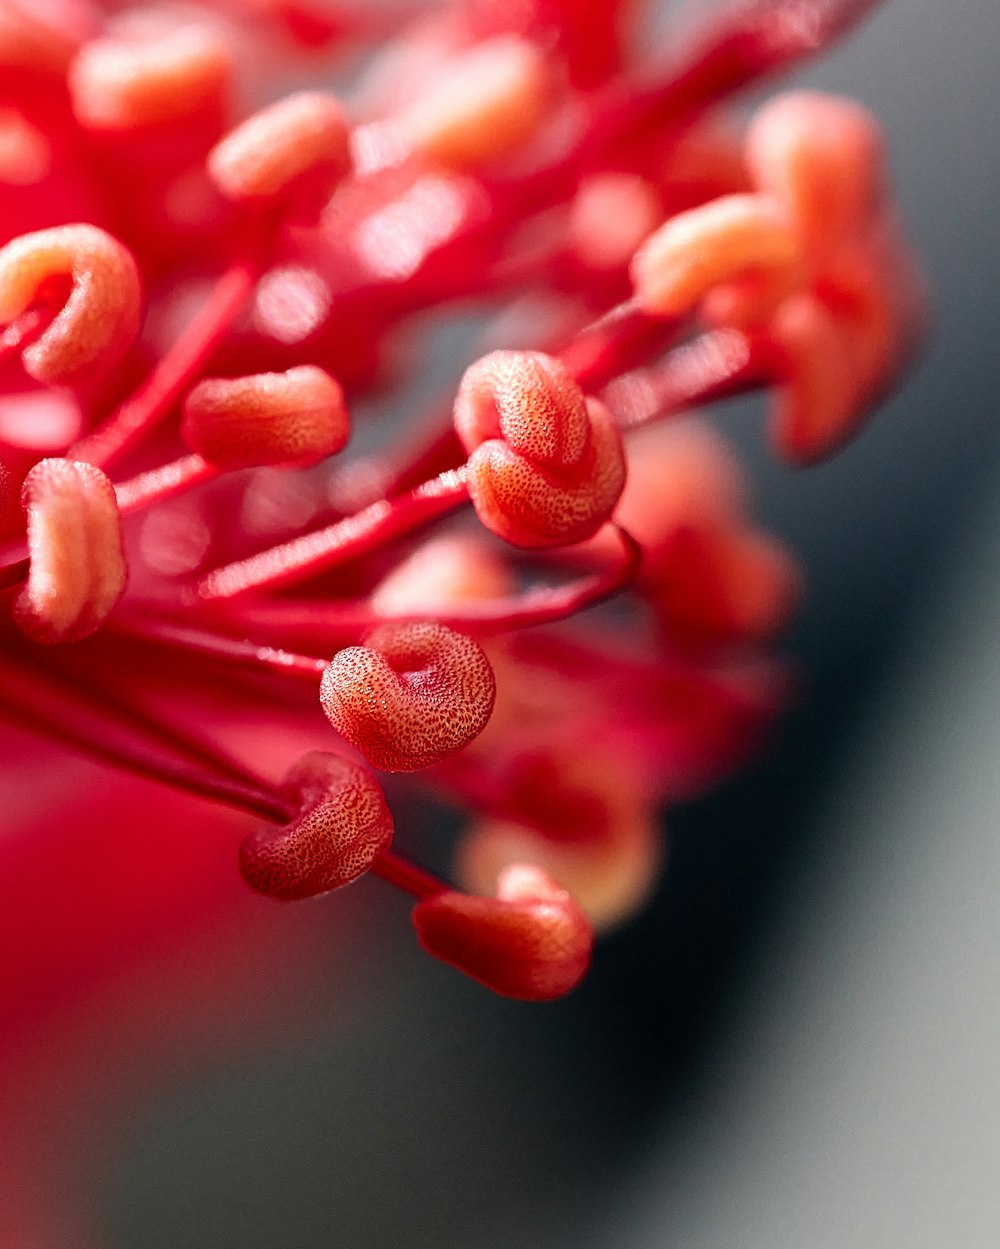 red and white flower in close up photography